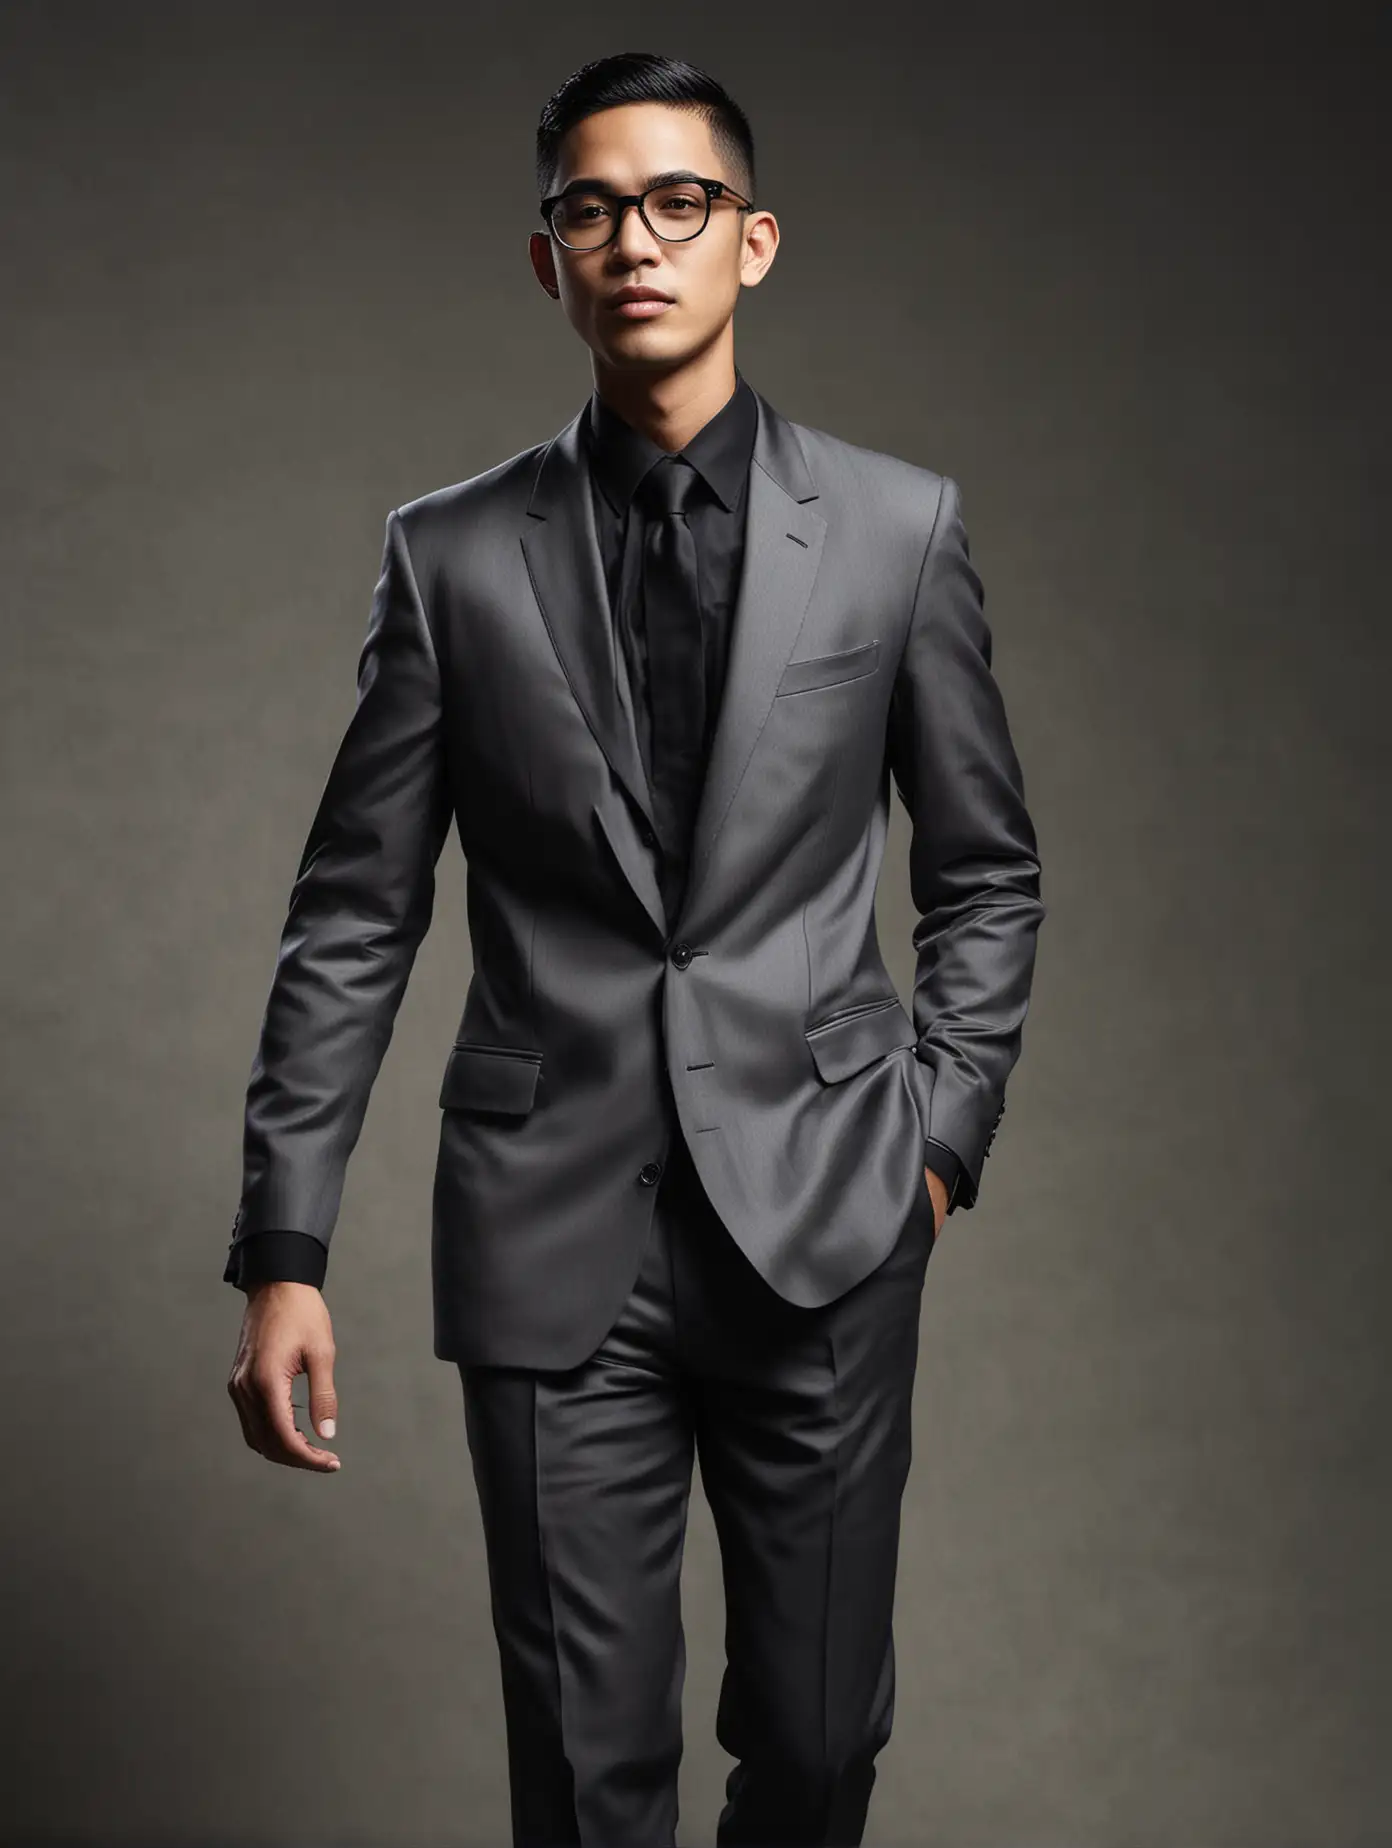 Generate a Southeast Asian man with black, less wavy hair styled in a buzz cut, wearing clear white glasses and a black formal suit. The man is posed in an elegant walking stance for a studio formal portrait. The background should be flat, and the overall style should resemble Annie Leibovitz's photography, known for its dramatic and intimate portrayals. The man should exude confidence and elegance, with a timeless quality that captures the essence of a classic portrait.
